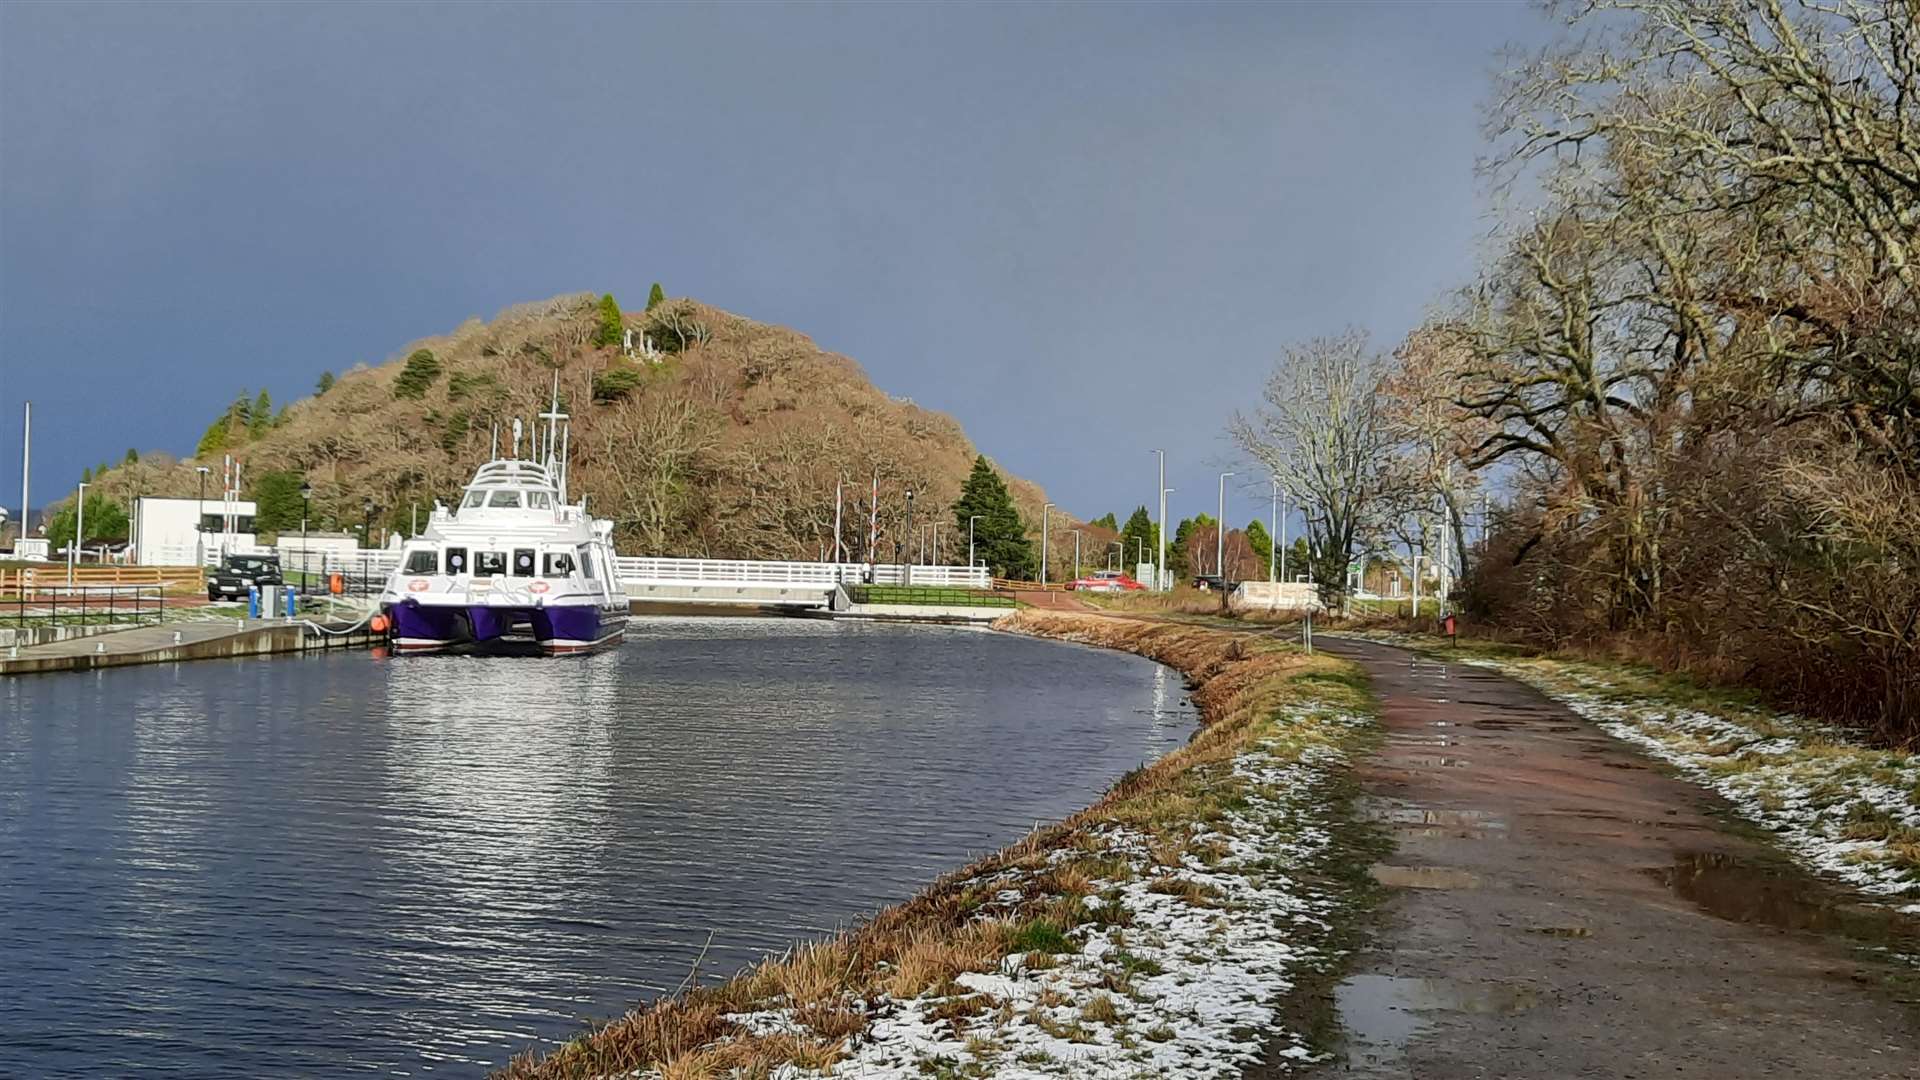 The Caledonian Canal and the cemetery of Tomnahurich.